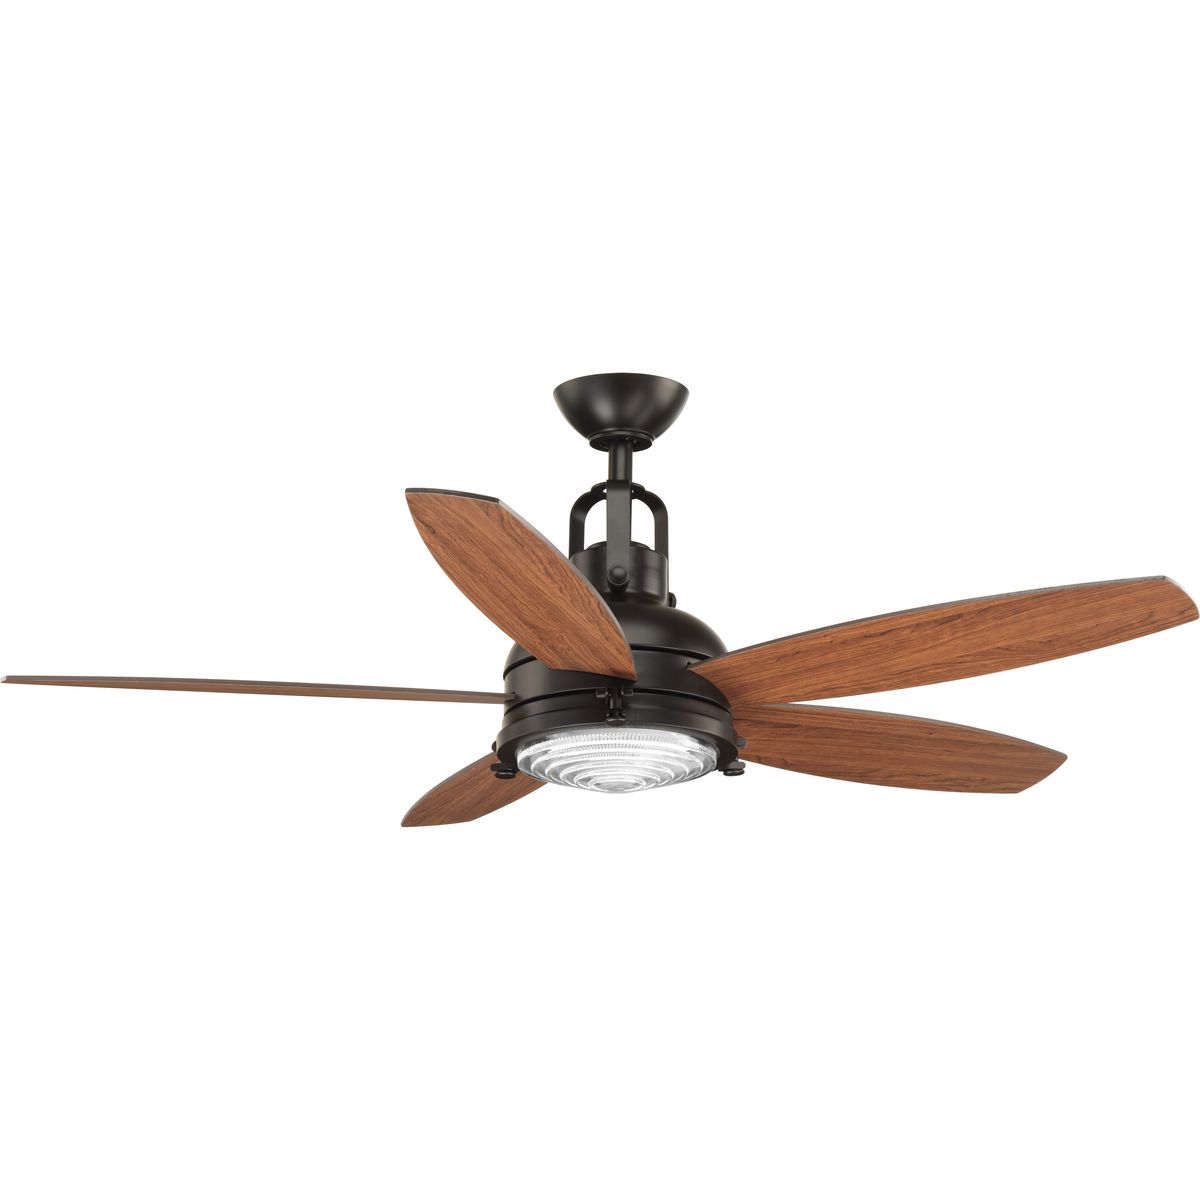 This five-blade 52 inch Kudos ceiling fan features a clear Fresnel glass shade and reversible blades in walnut and cherry. Includes a remote control with batteries. The Kudos features a dual mount system to offer greater flexibility when installing. The 17W dimmable, 3000K LED module provides energy- and cost-savings benefits to the homeowner.